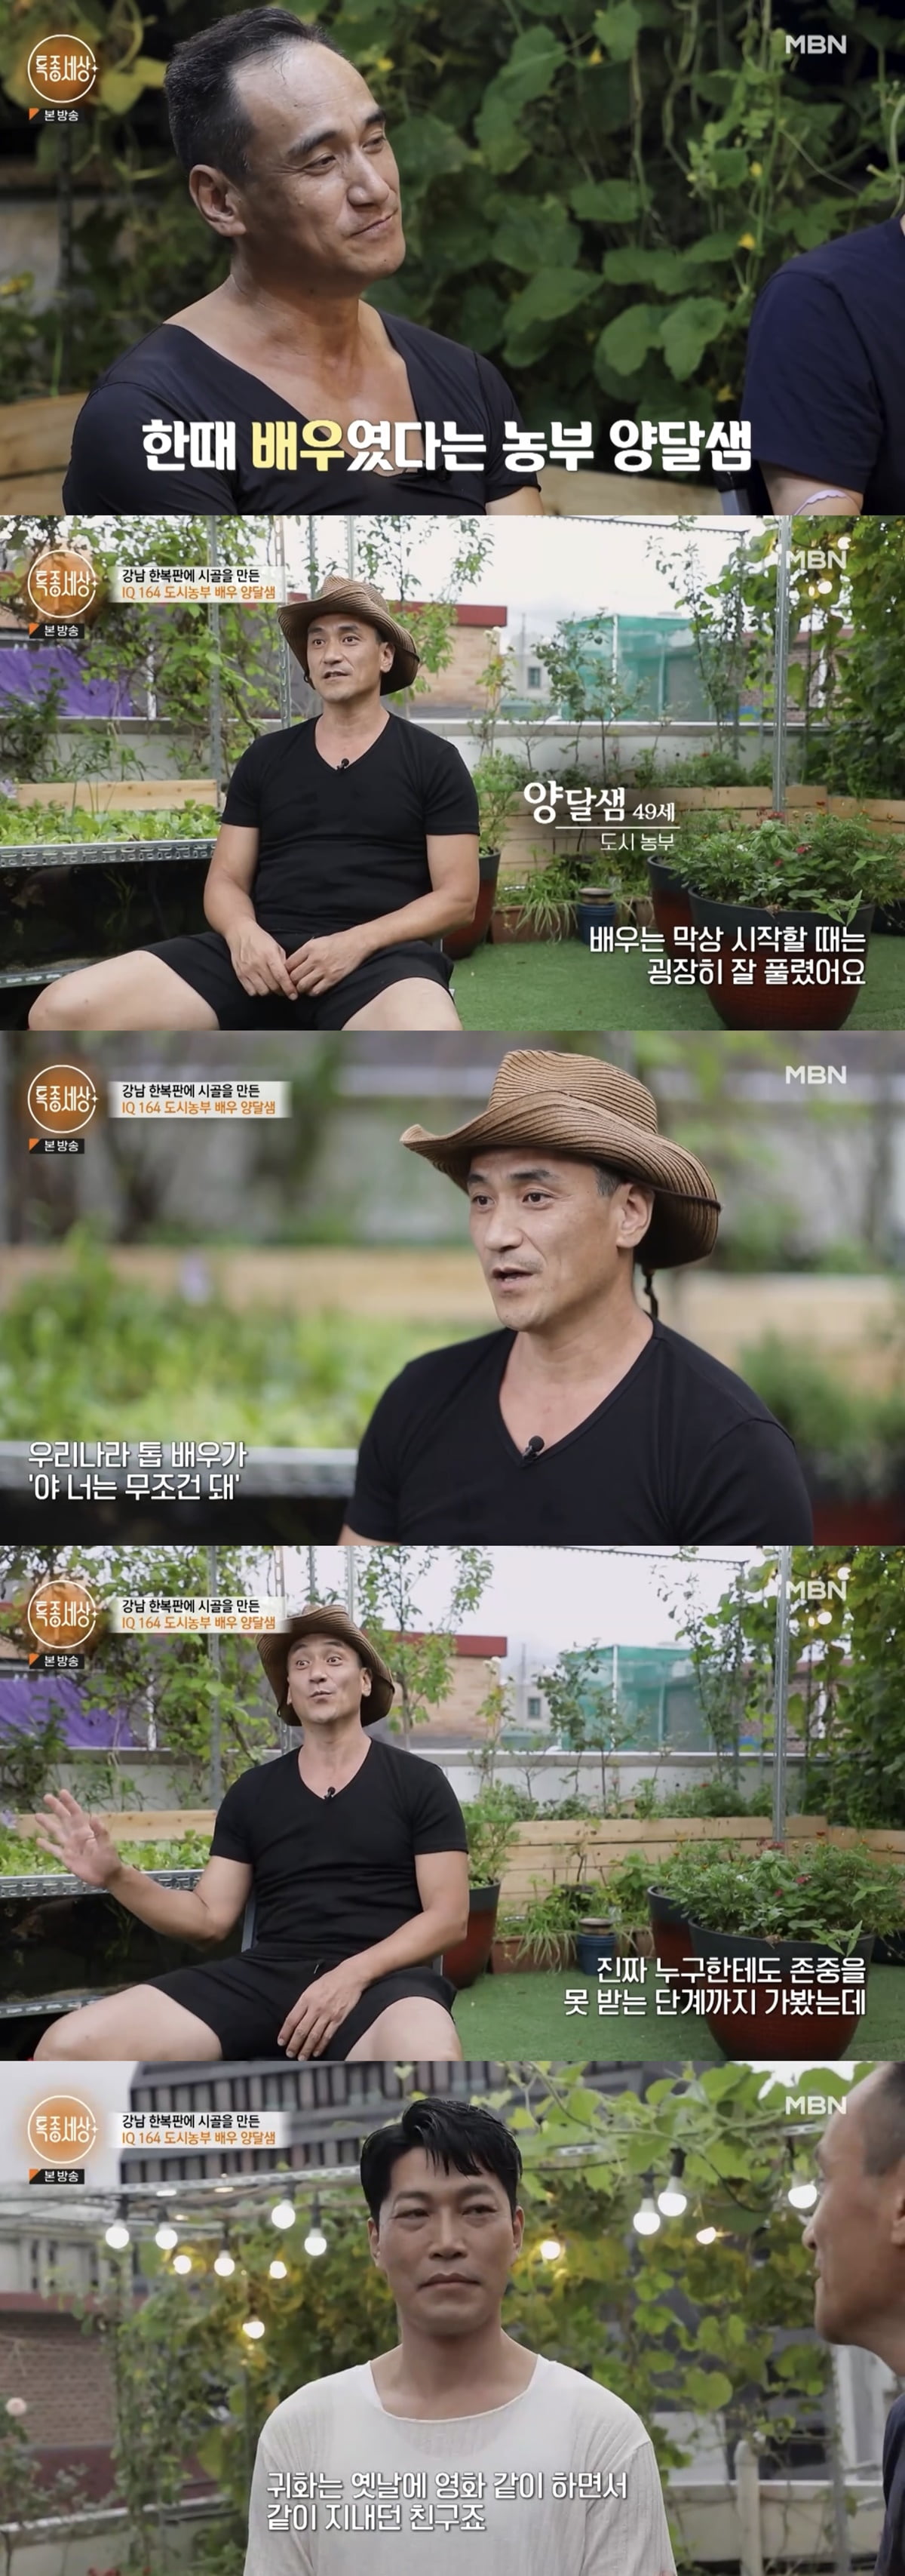 Choi Gwi-hwa "I bought land in the countryside and grew weeds for many years"